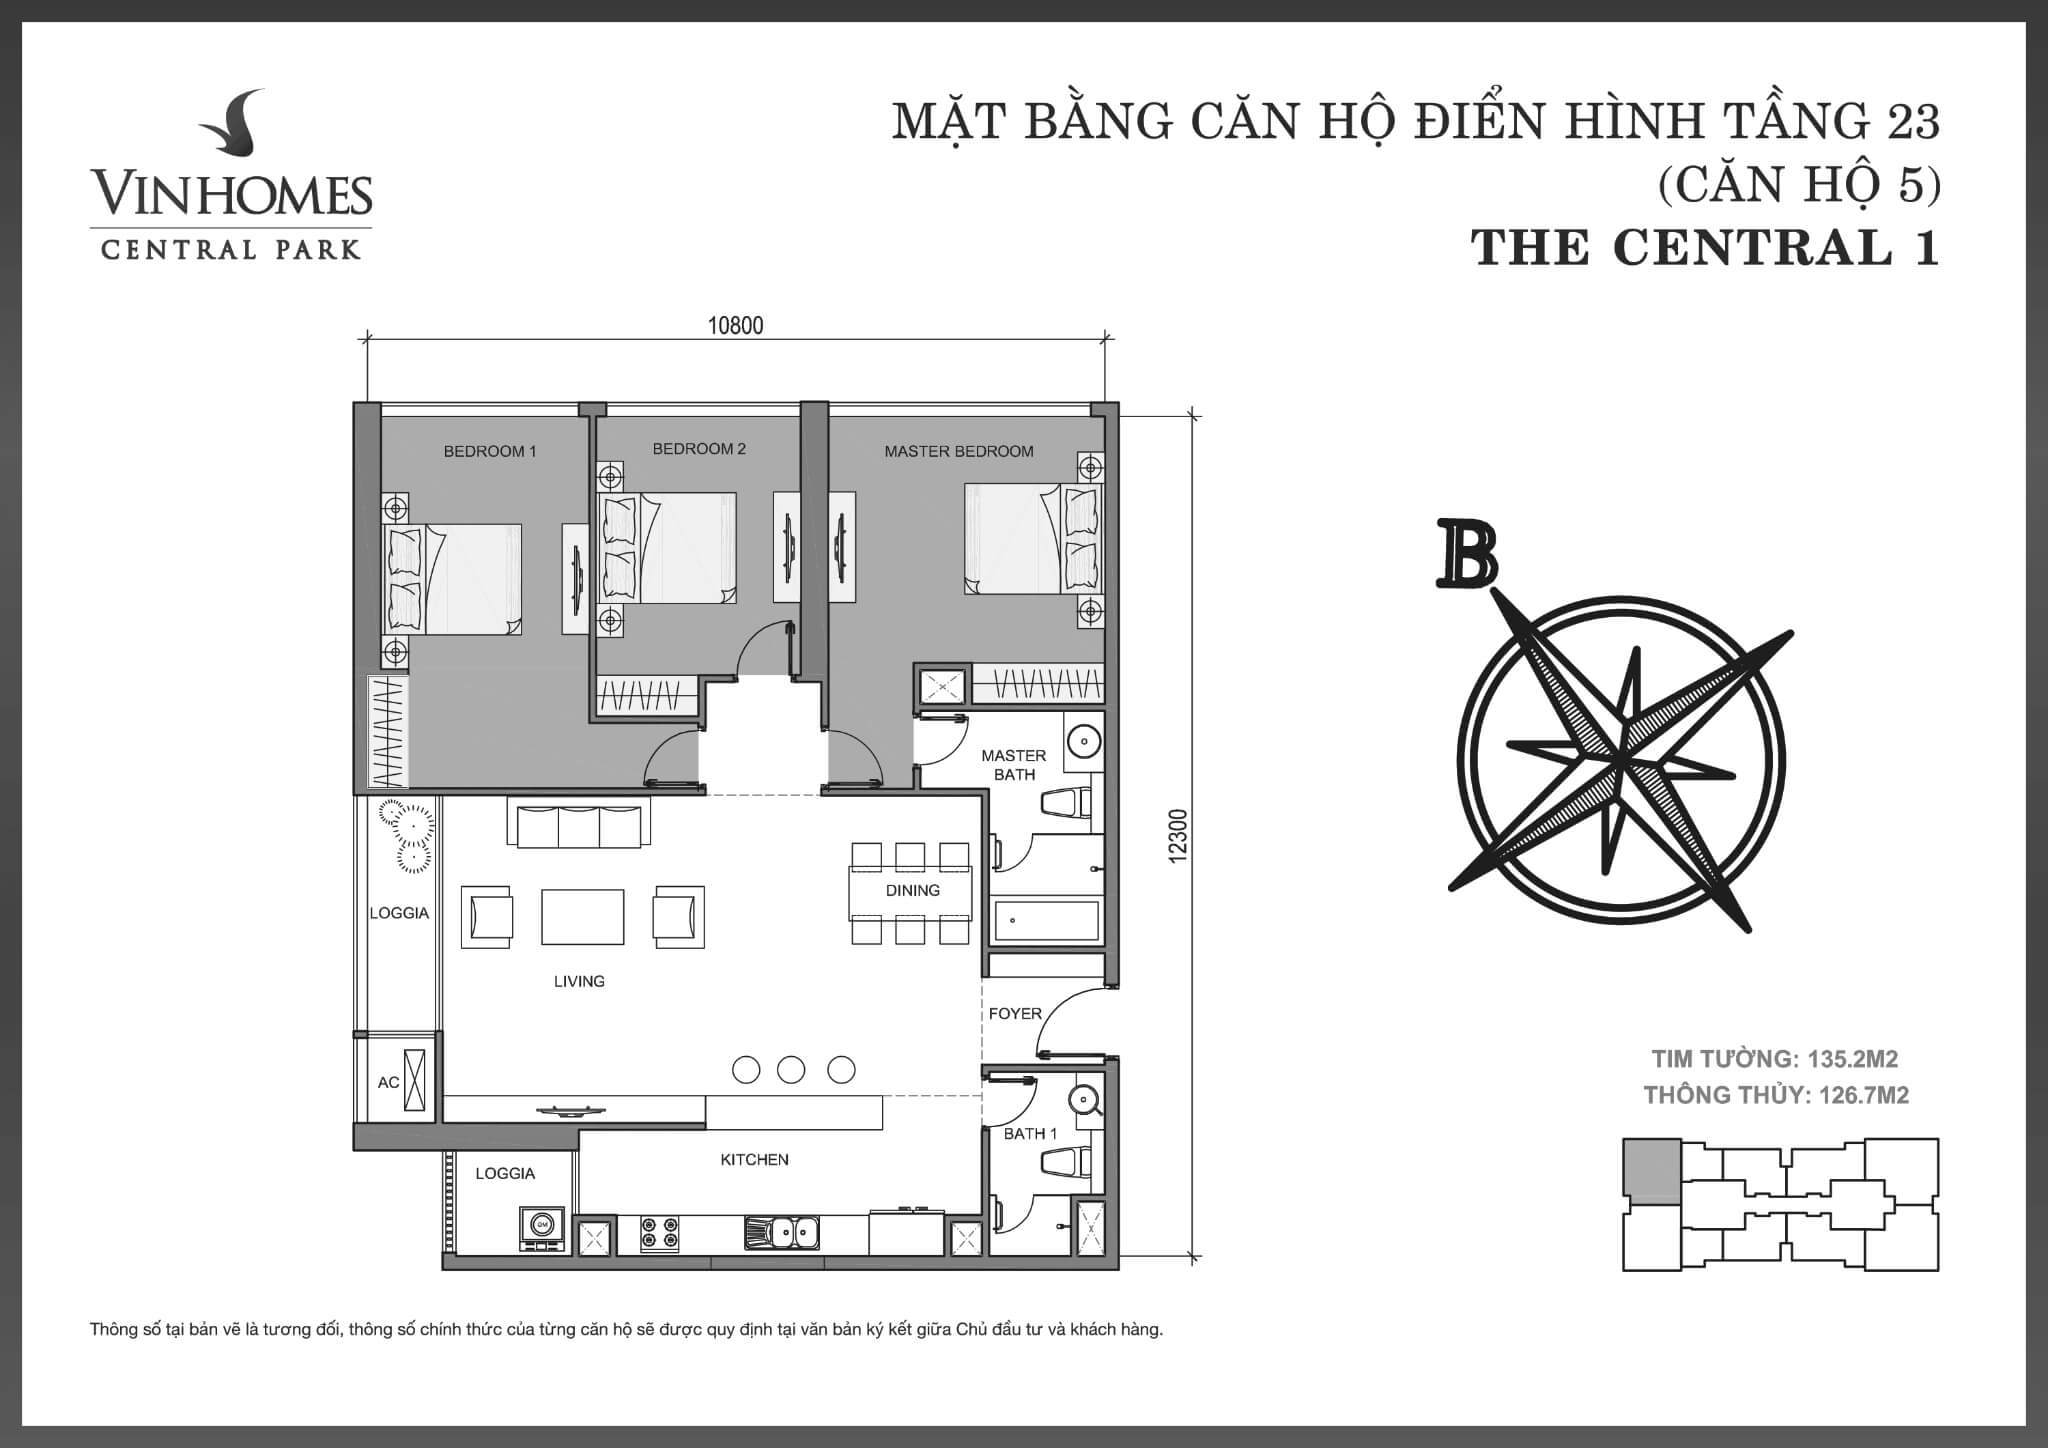 Layout C1-05 tầng 23 | Central 1 - Vinhomes Central Park